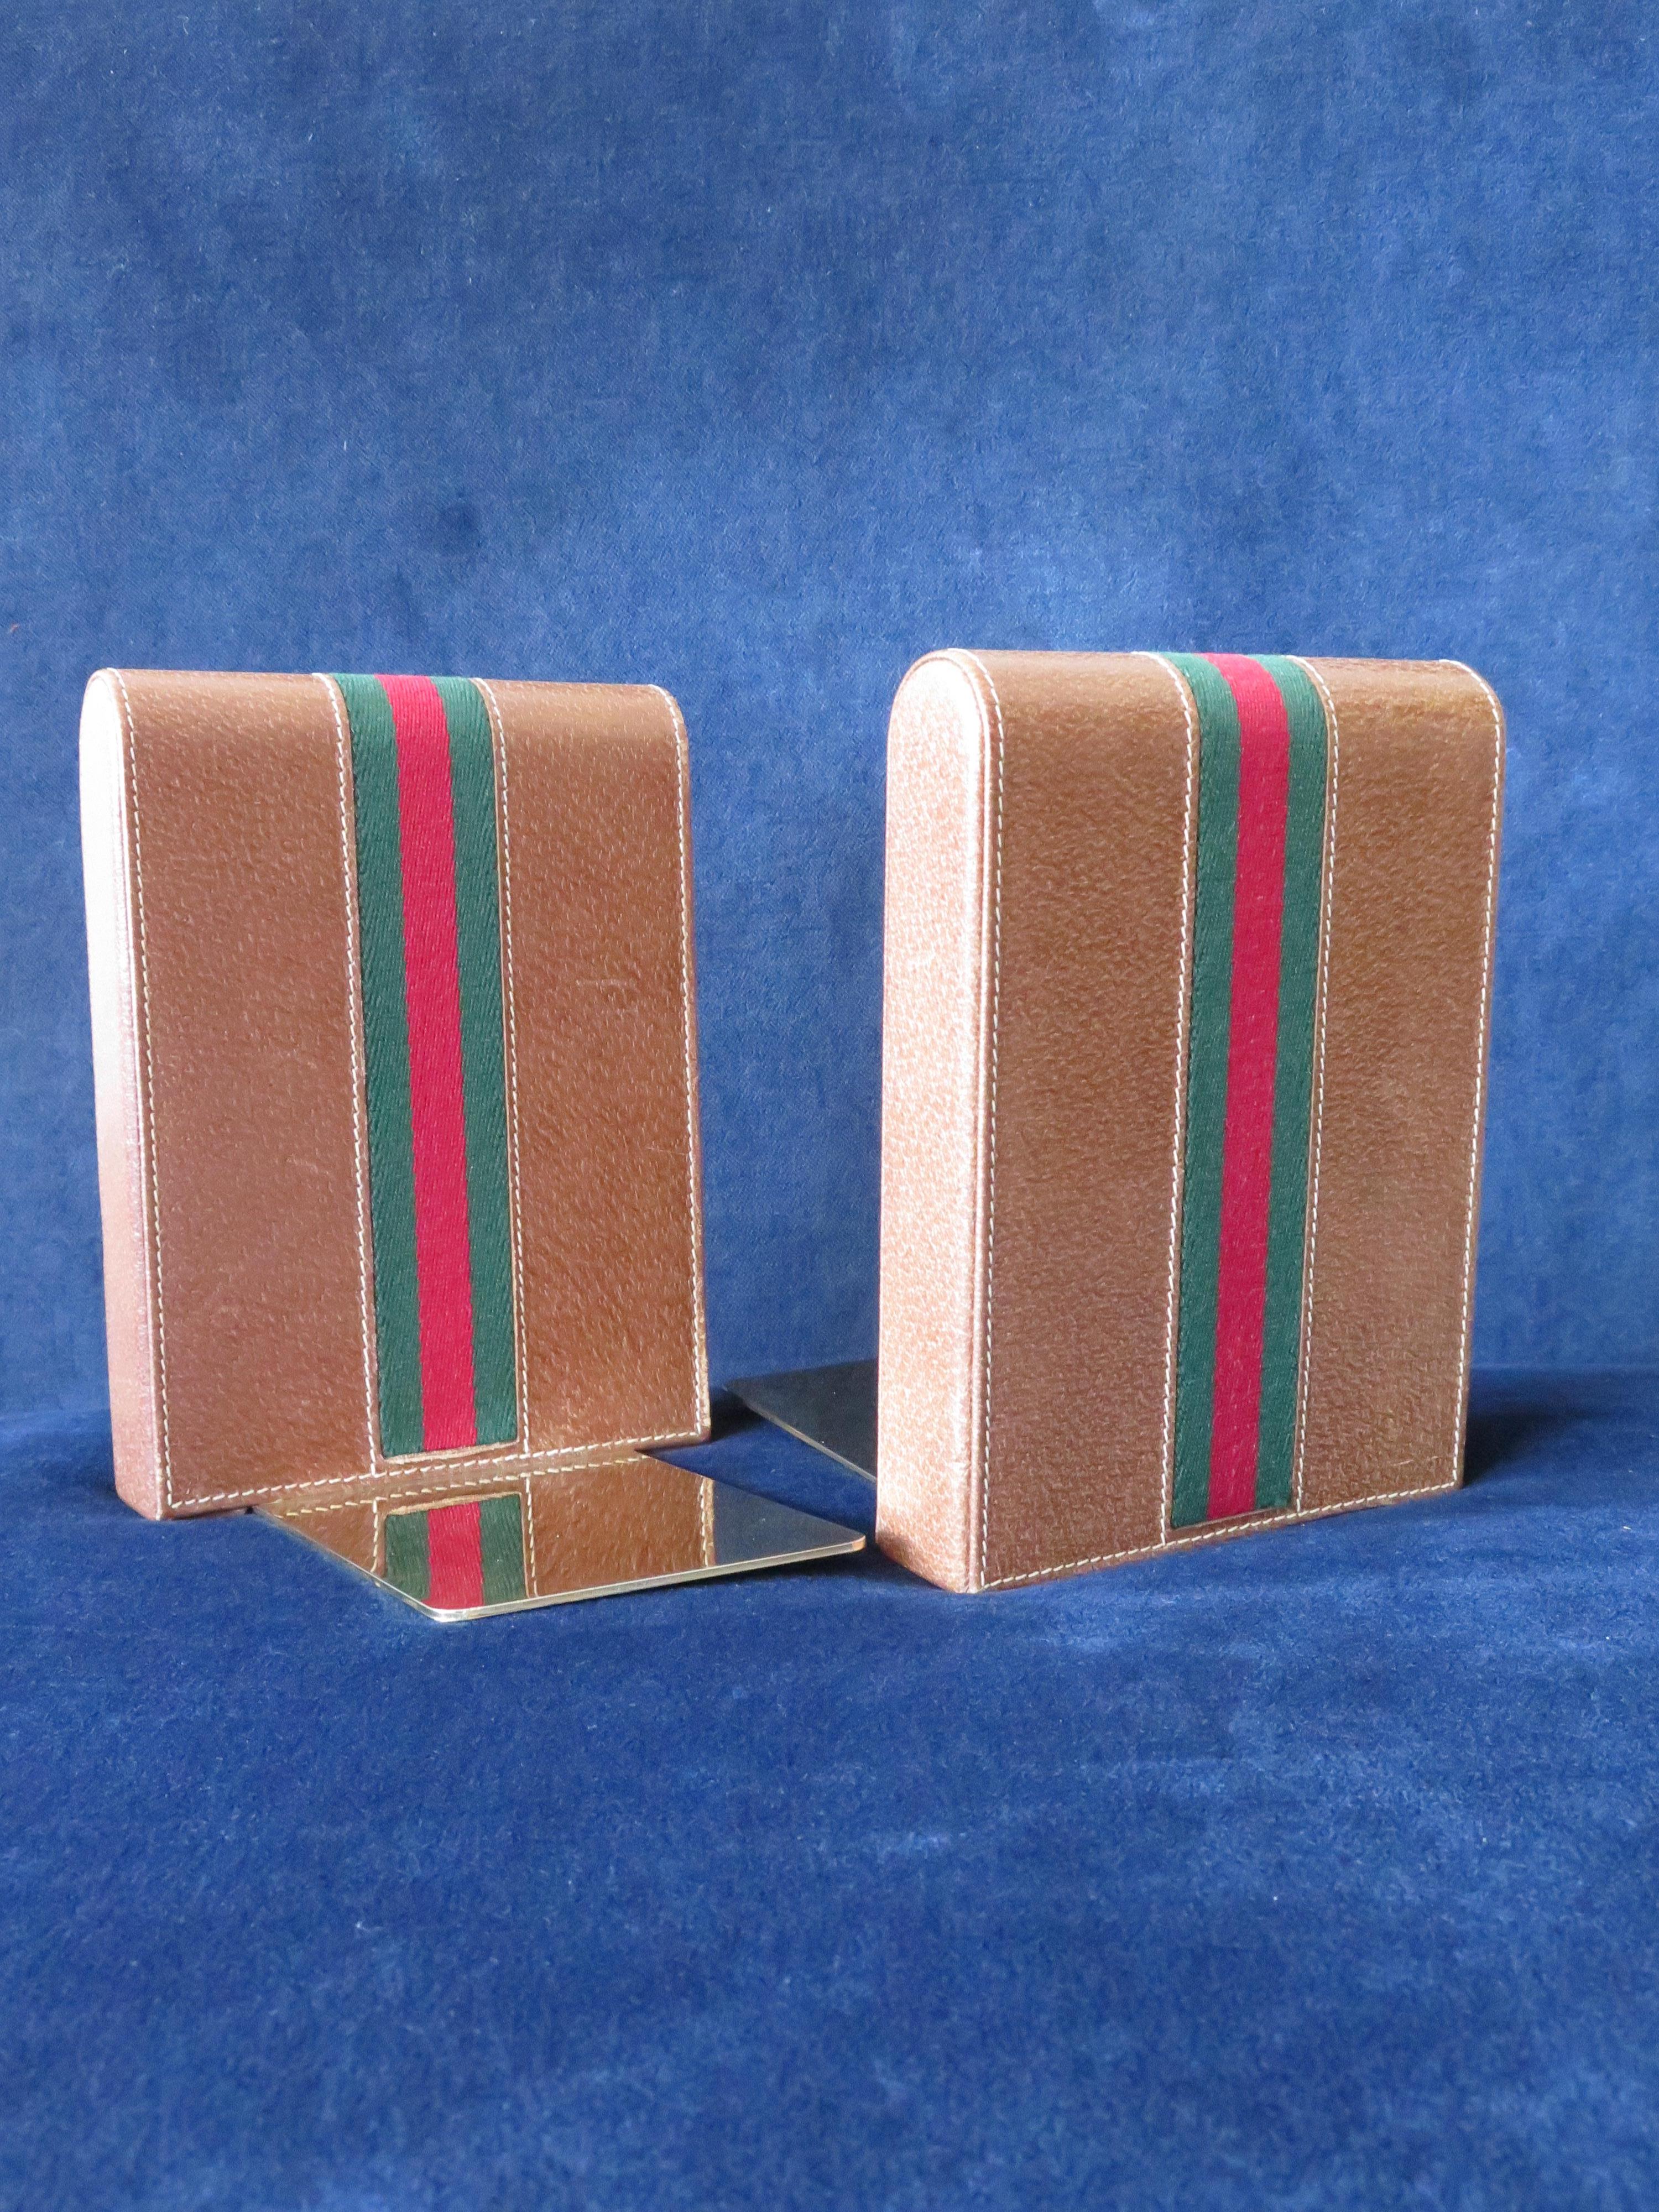 A pair of classic bookends by Gucci. Classic brown leather stripe with brass bases. Beautiful stitching and attention to details.